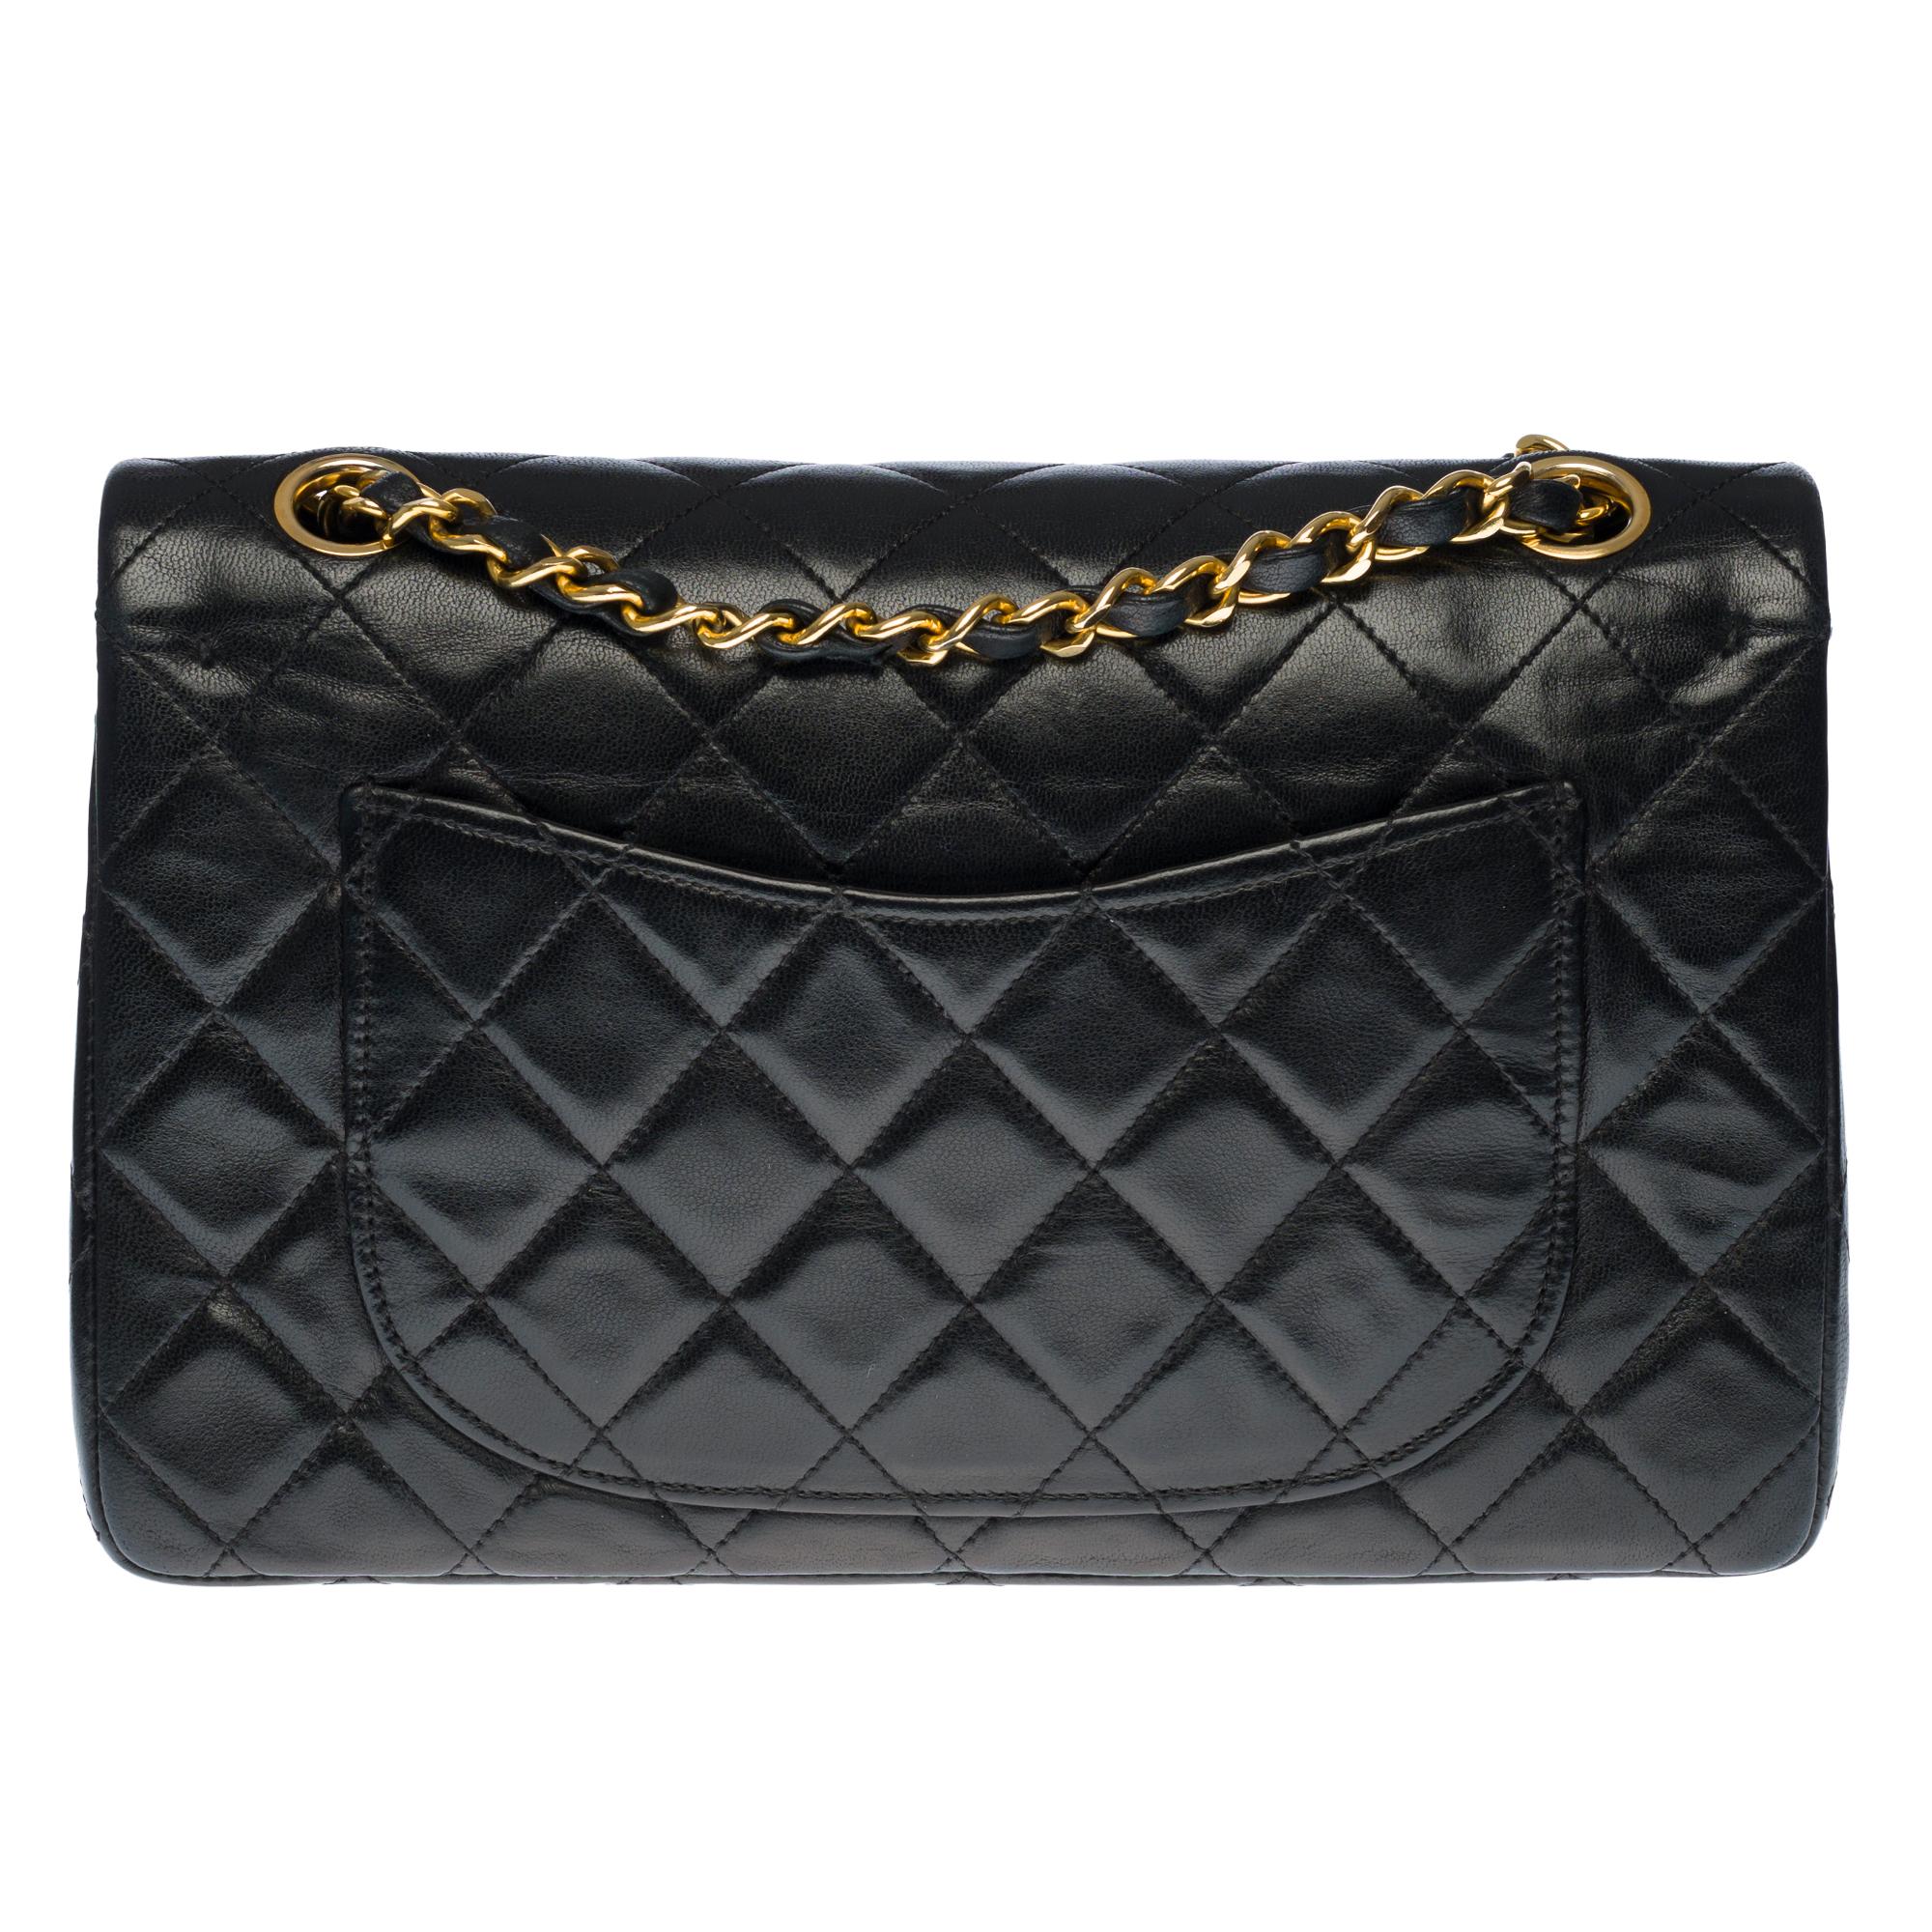 The coveted Chanel Timeless 23cm double flap bag in quilted black lambskin leather, gold metal trim, gold metal chain intertwined with black leather for shoulder and shoulder strap
Pocket on the back of the bag.
Flap closure, gold-tone CC